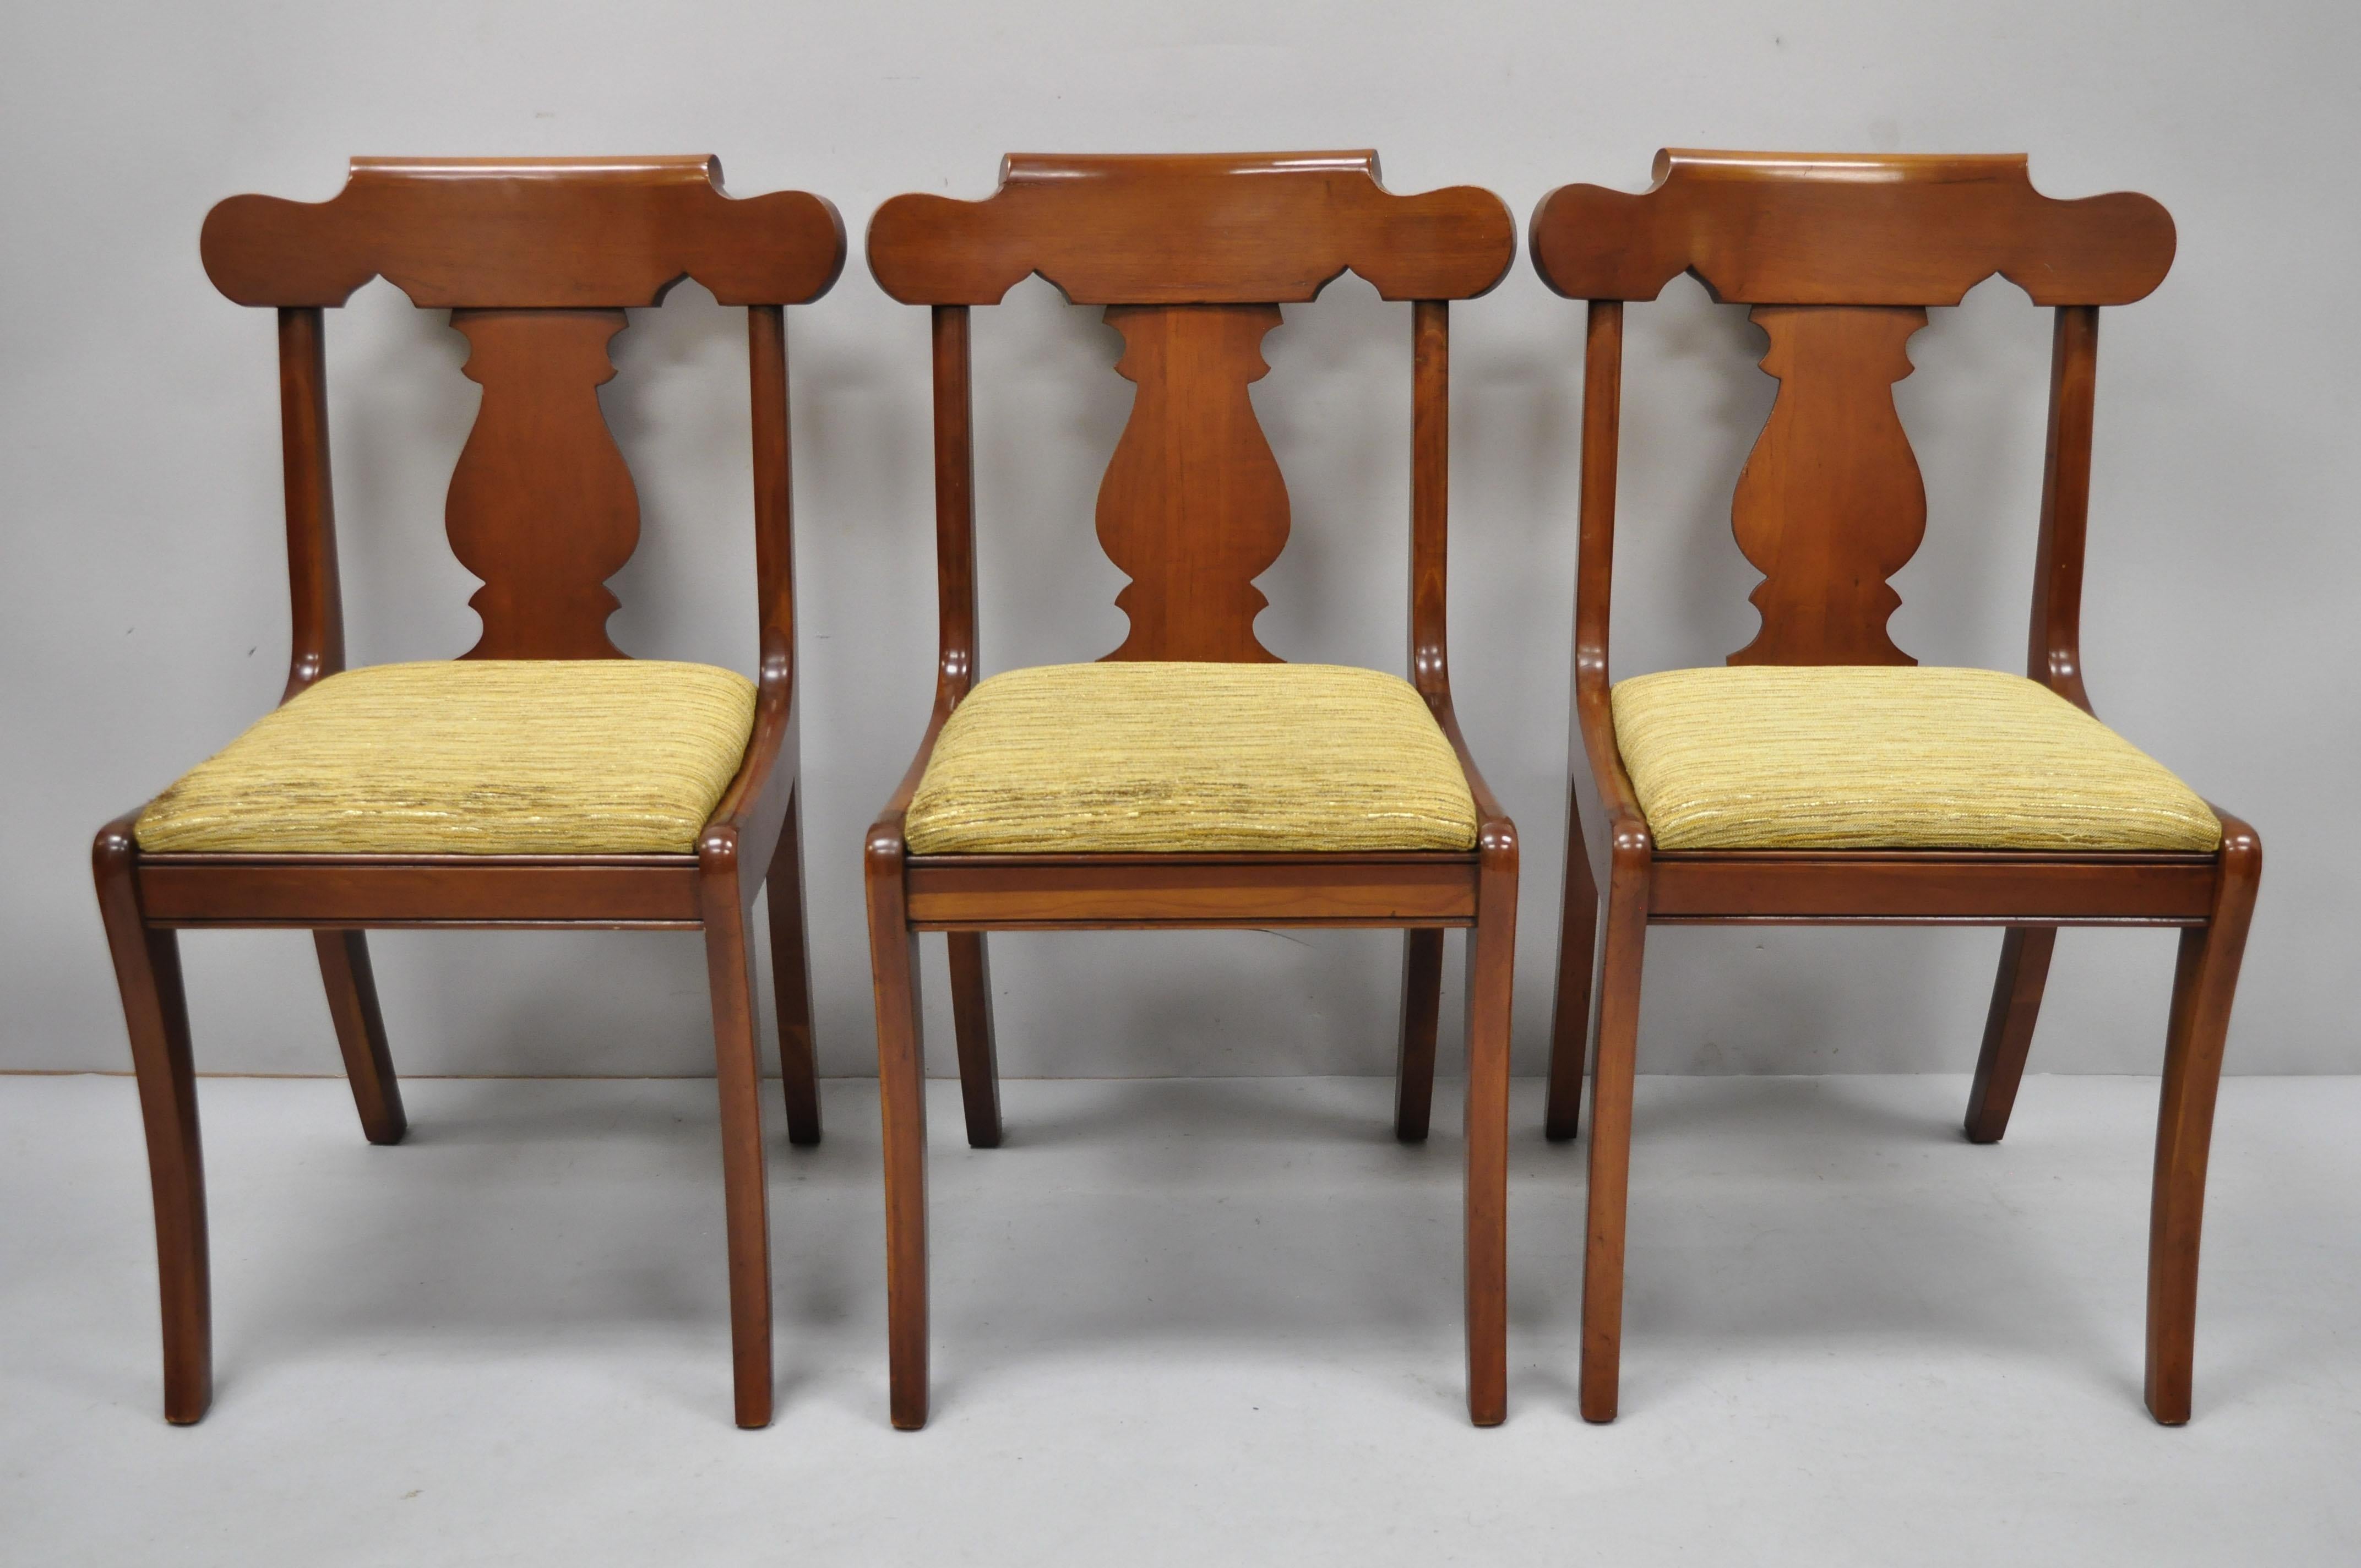 Set of six vintage Statton solid cherrywood American Colonial dining chairs. Listing includes (6) side chairs, solid wood construction, beautiful wood grain, original label, shapely saber legs, quality American craftsmanship, great style and form,